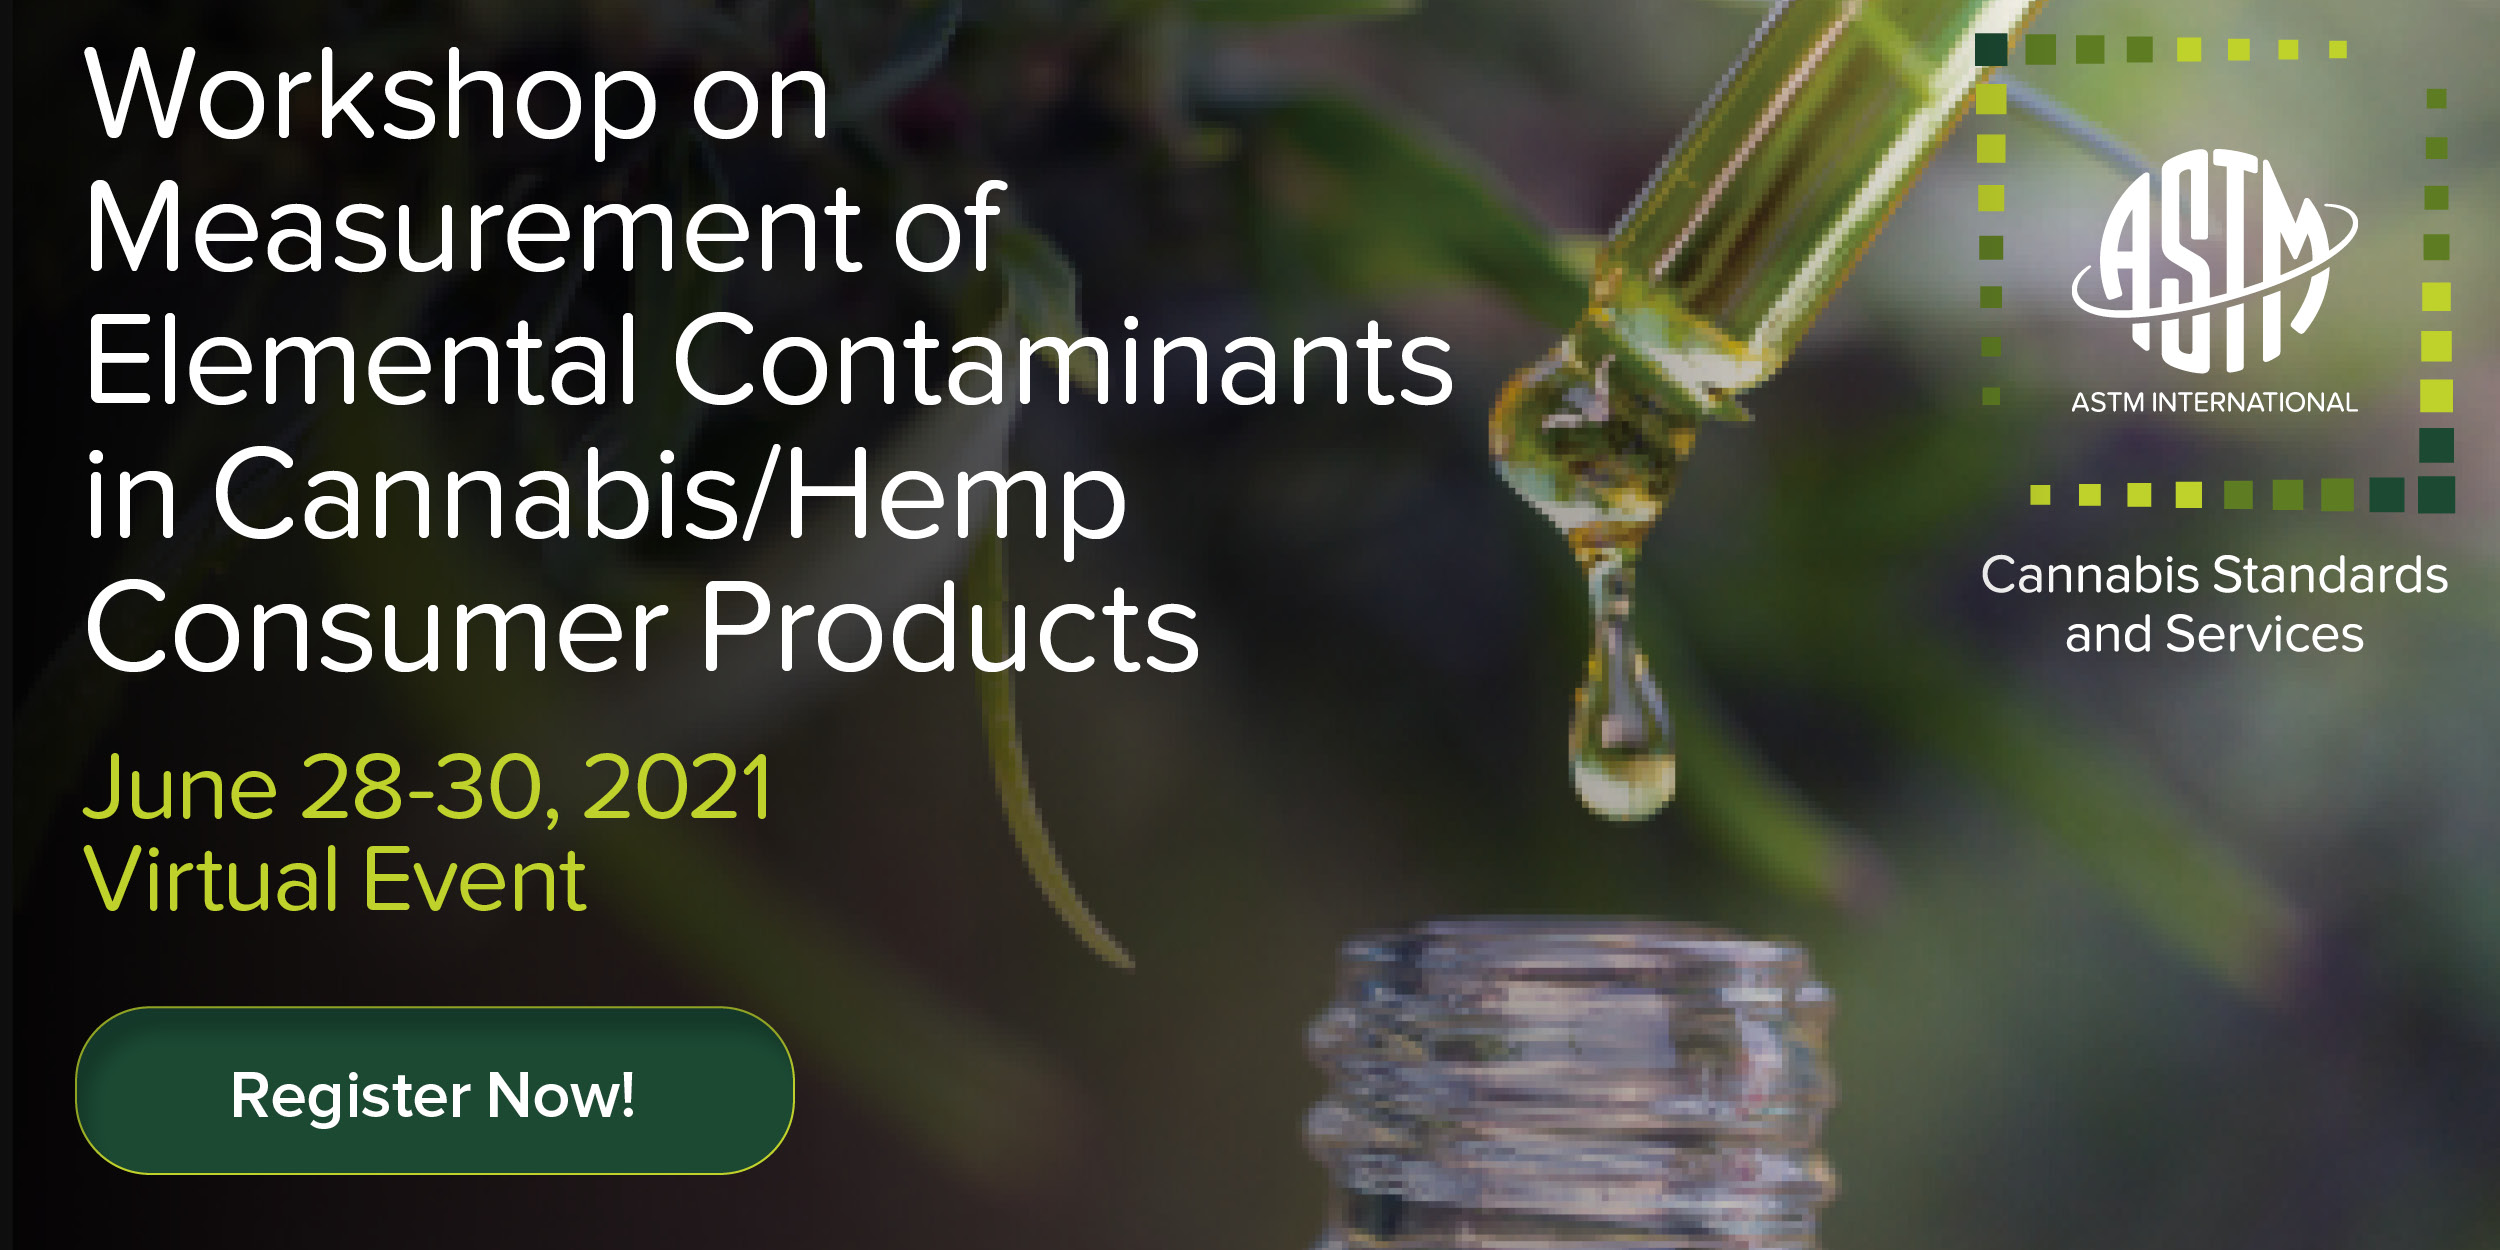 Workshop on Measurement of Elemental Contaminants in Cannabis/Hemp Consumer Products